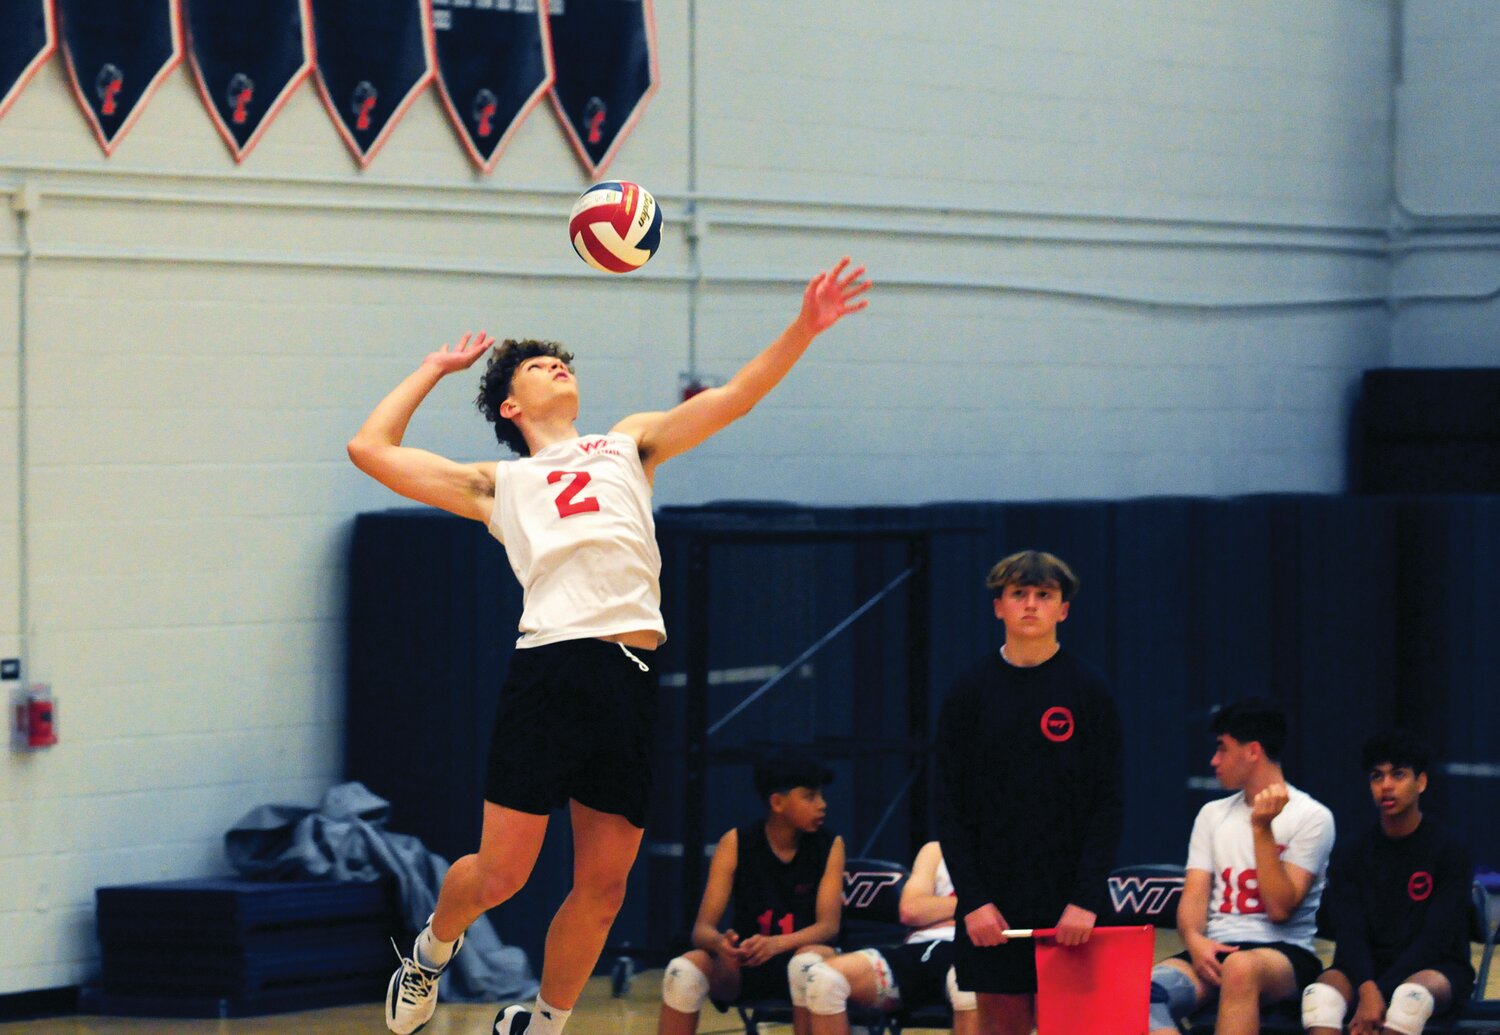 William Tennent’s Eric Korchuk serves up a ball in the Panthers’ recent Suburban One League matchup with Pennsbury.